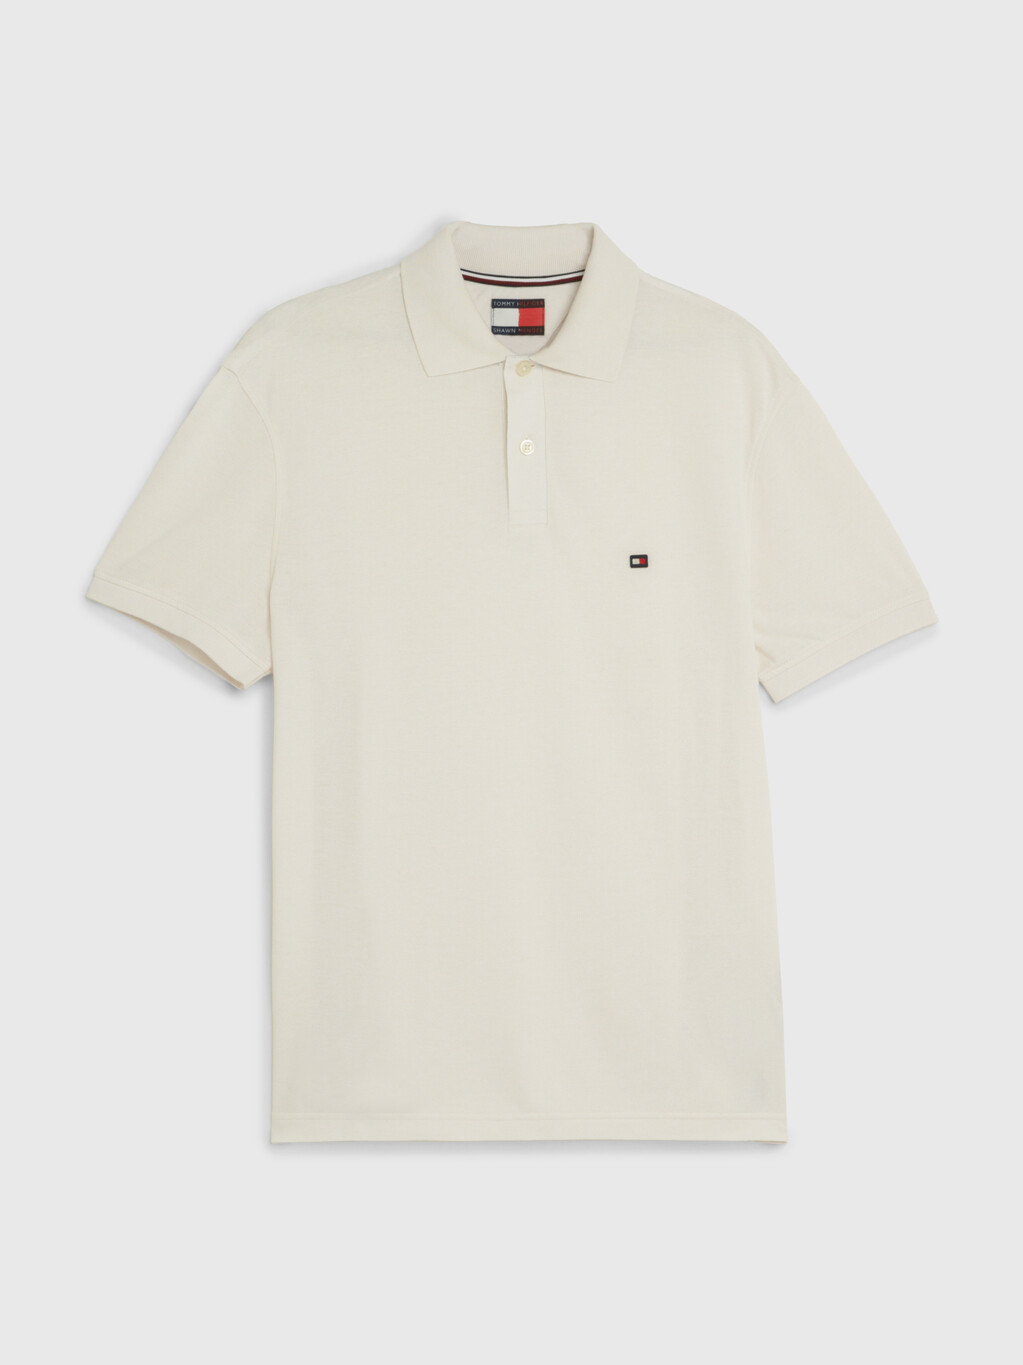 Tommy Hilfiger X Shawn Mendes Polo, Weathered White, hi-res